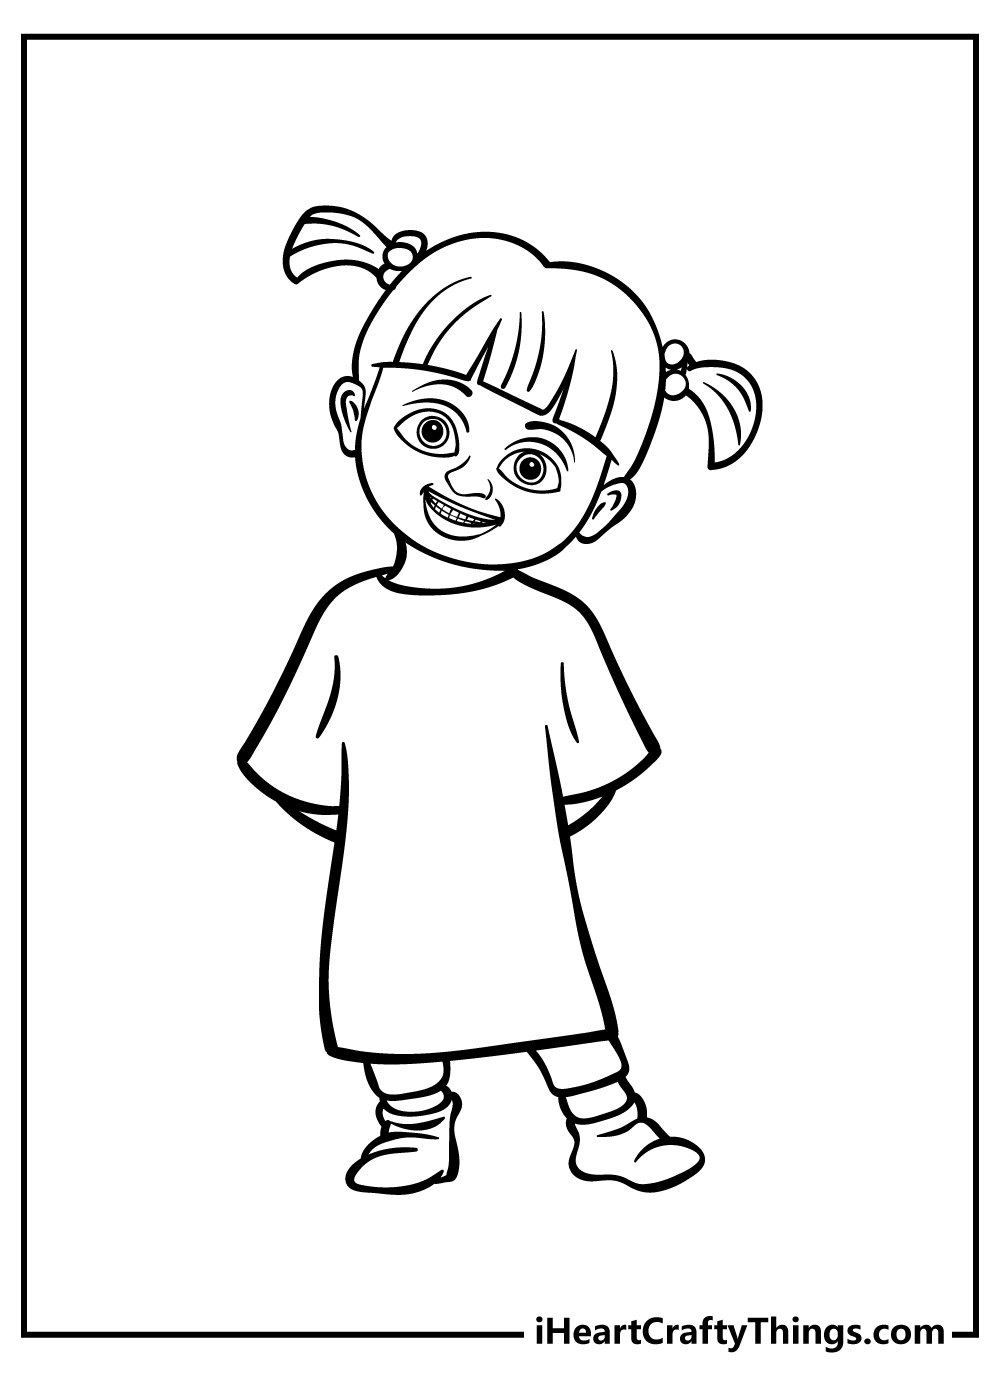 Monsters Inc. Coloring Pages for preschoolers free printable